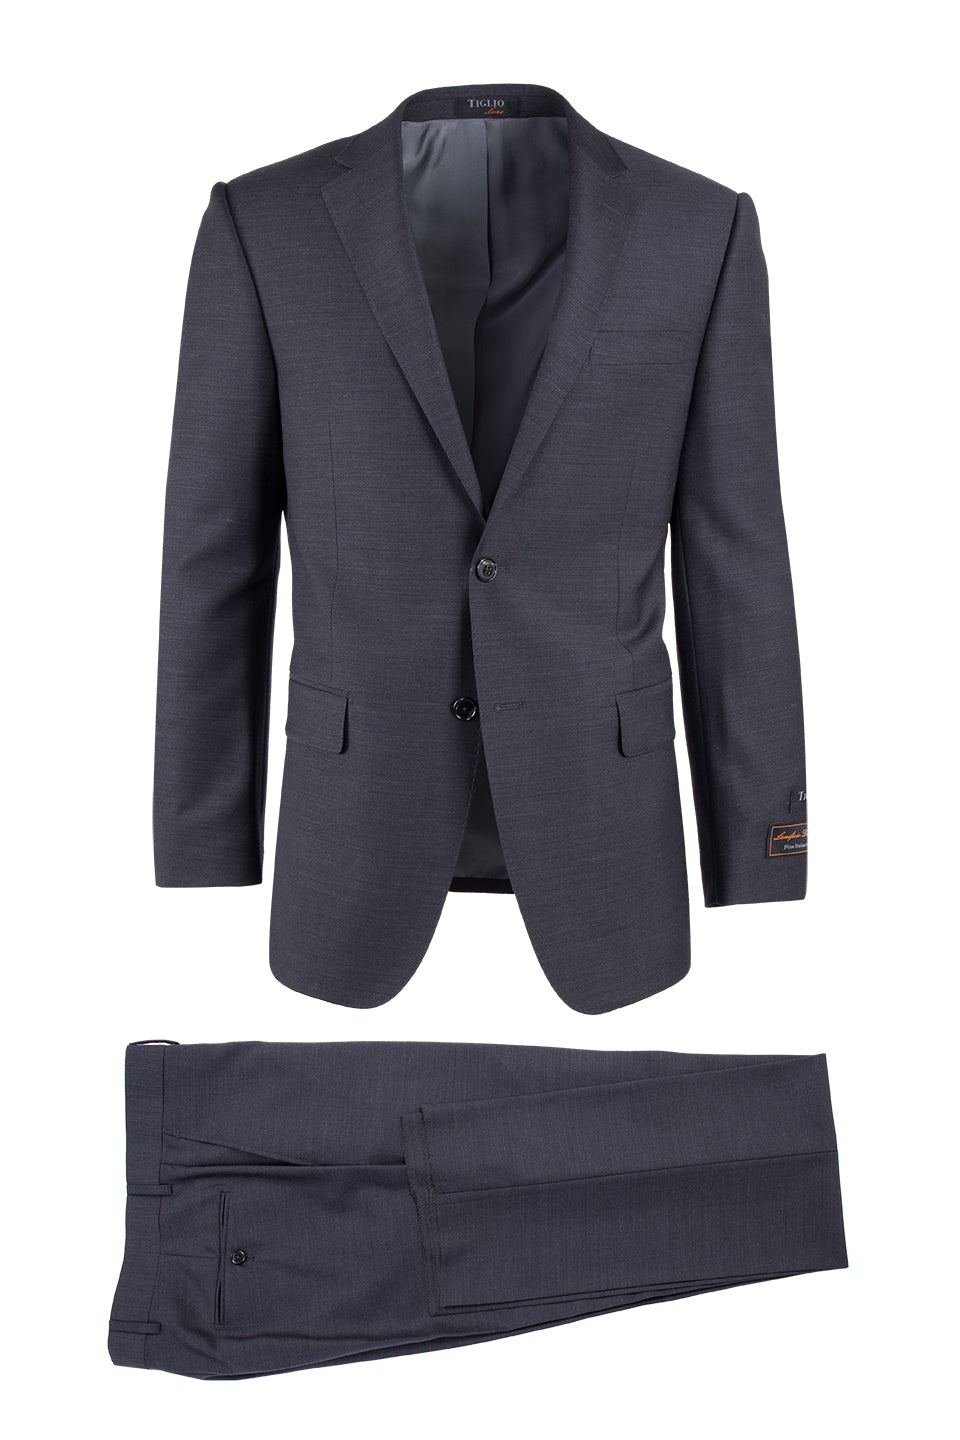 Novello Charcoal Gray, Modern Fit, Pure Wool Suit by Tiglio Luxe TIG10 |  Tiglio